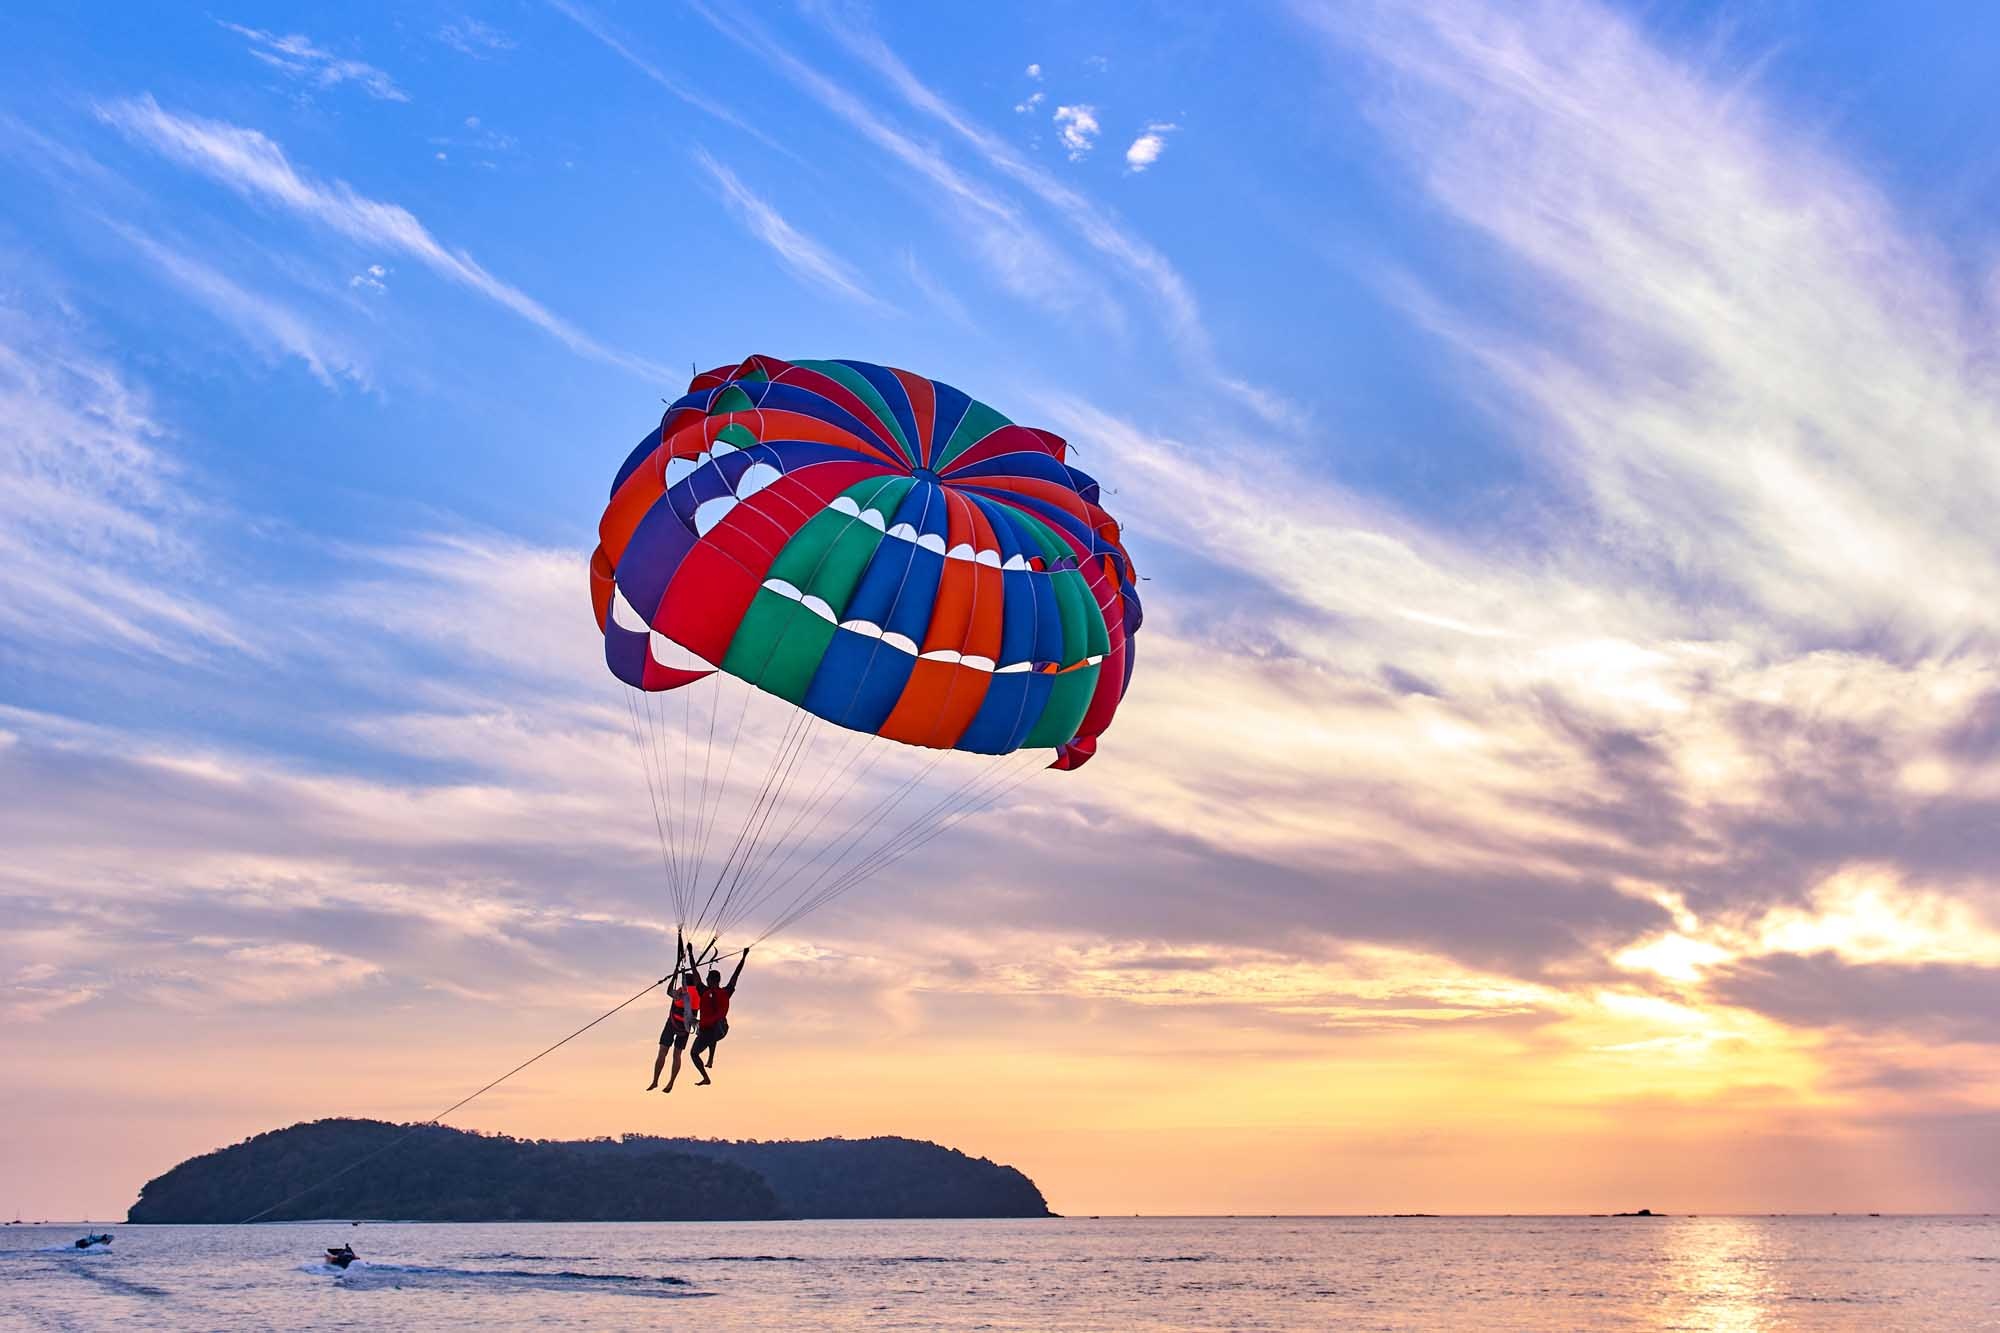 Parasailing: Flying high with a parachute, Tenerife, Sunset, An active lifestyle. 2000x1340 HD Wallpaper.